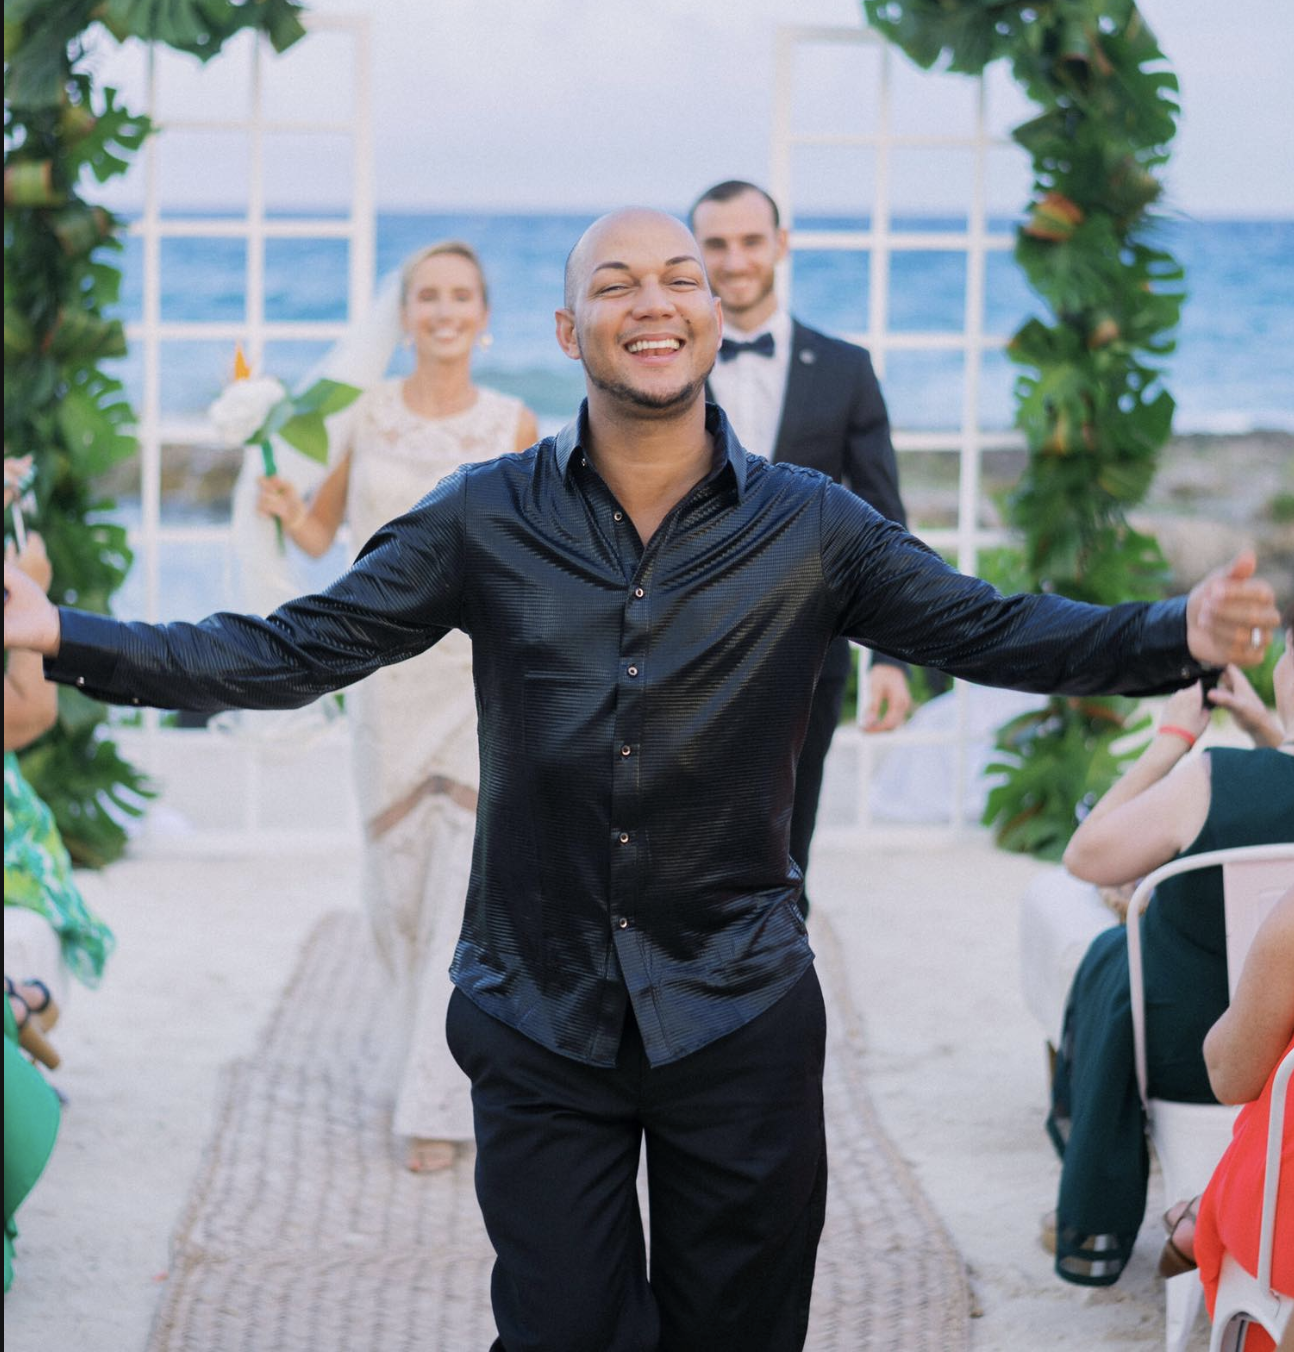 A look back at the interview with Destination Wedding Expert Will Medina